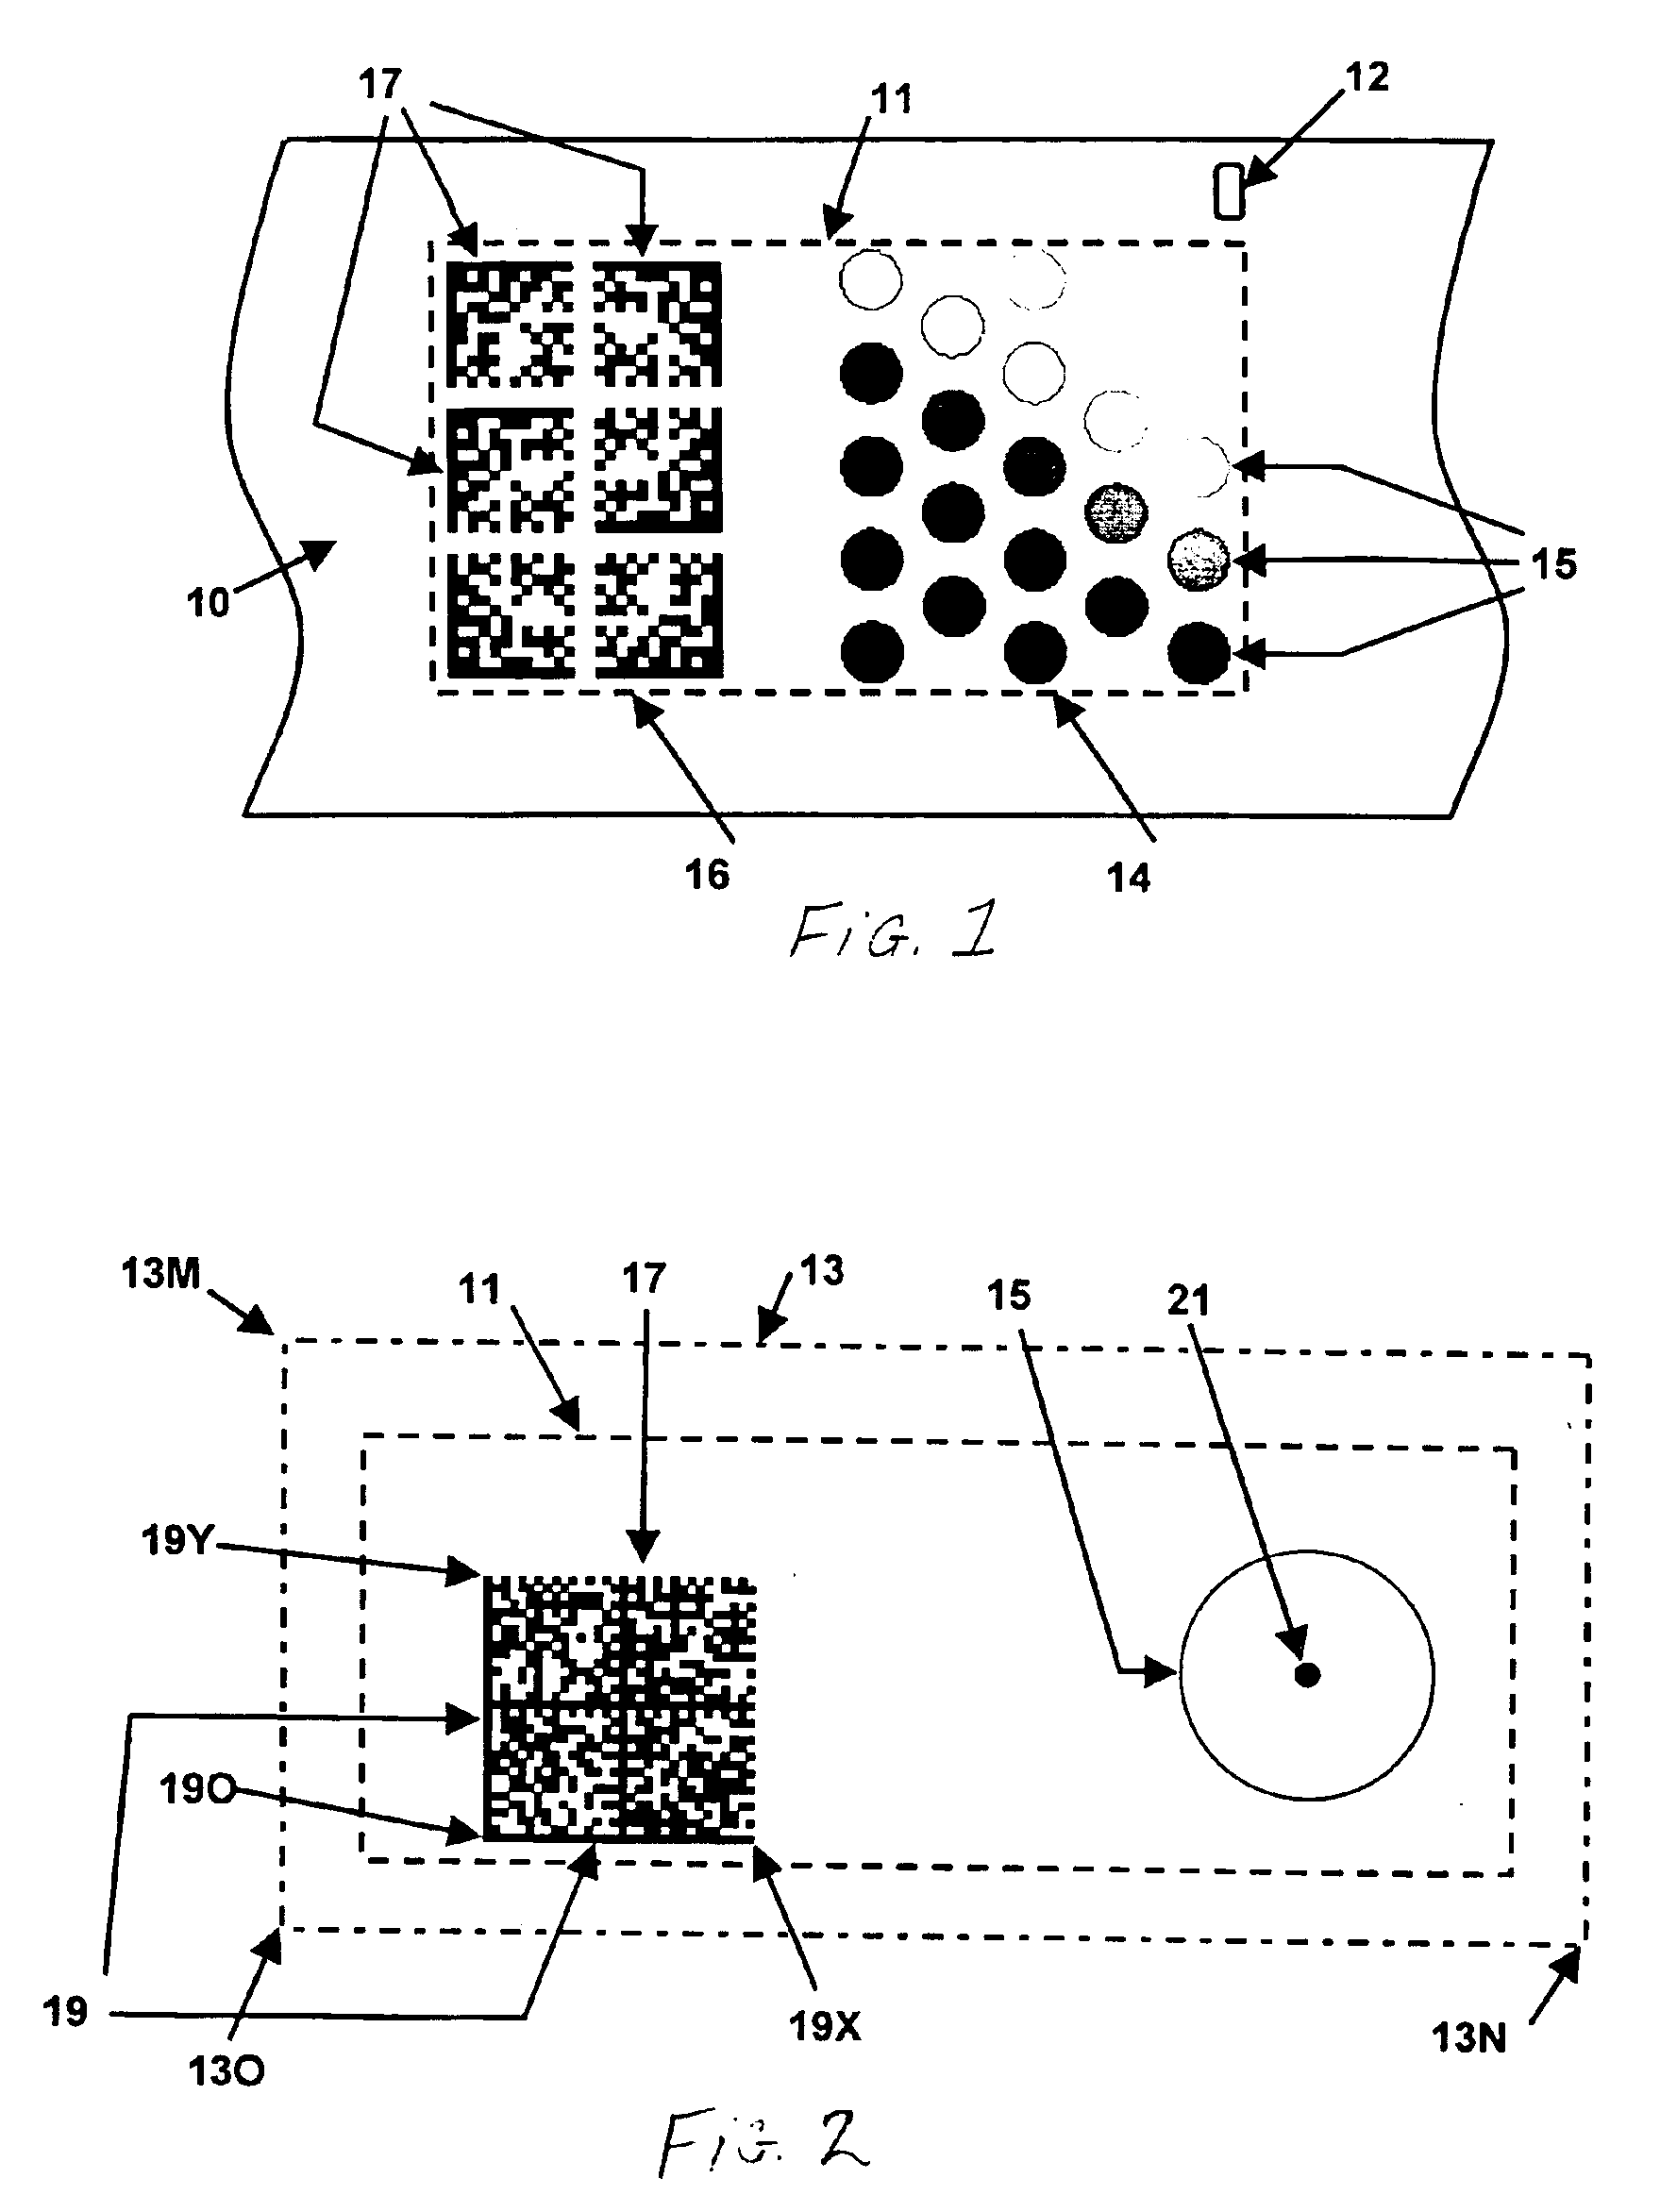 Method of locating a calibration patch in a reference calibration target